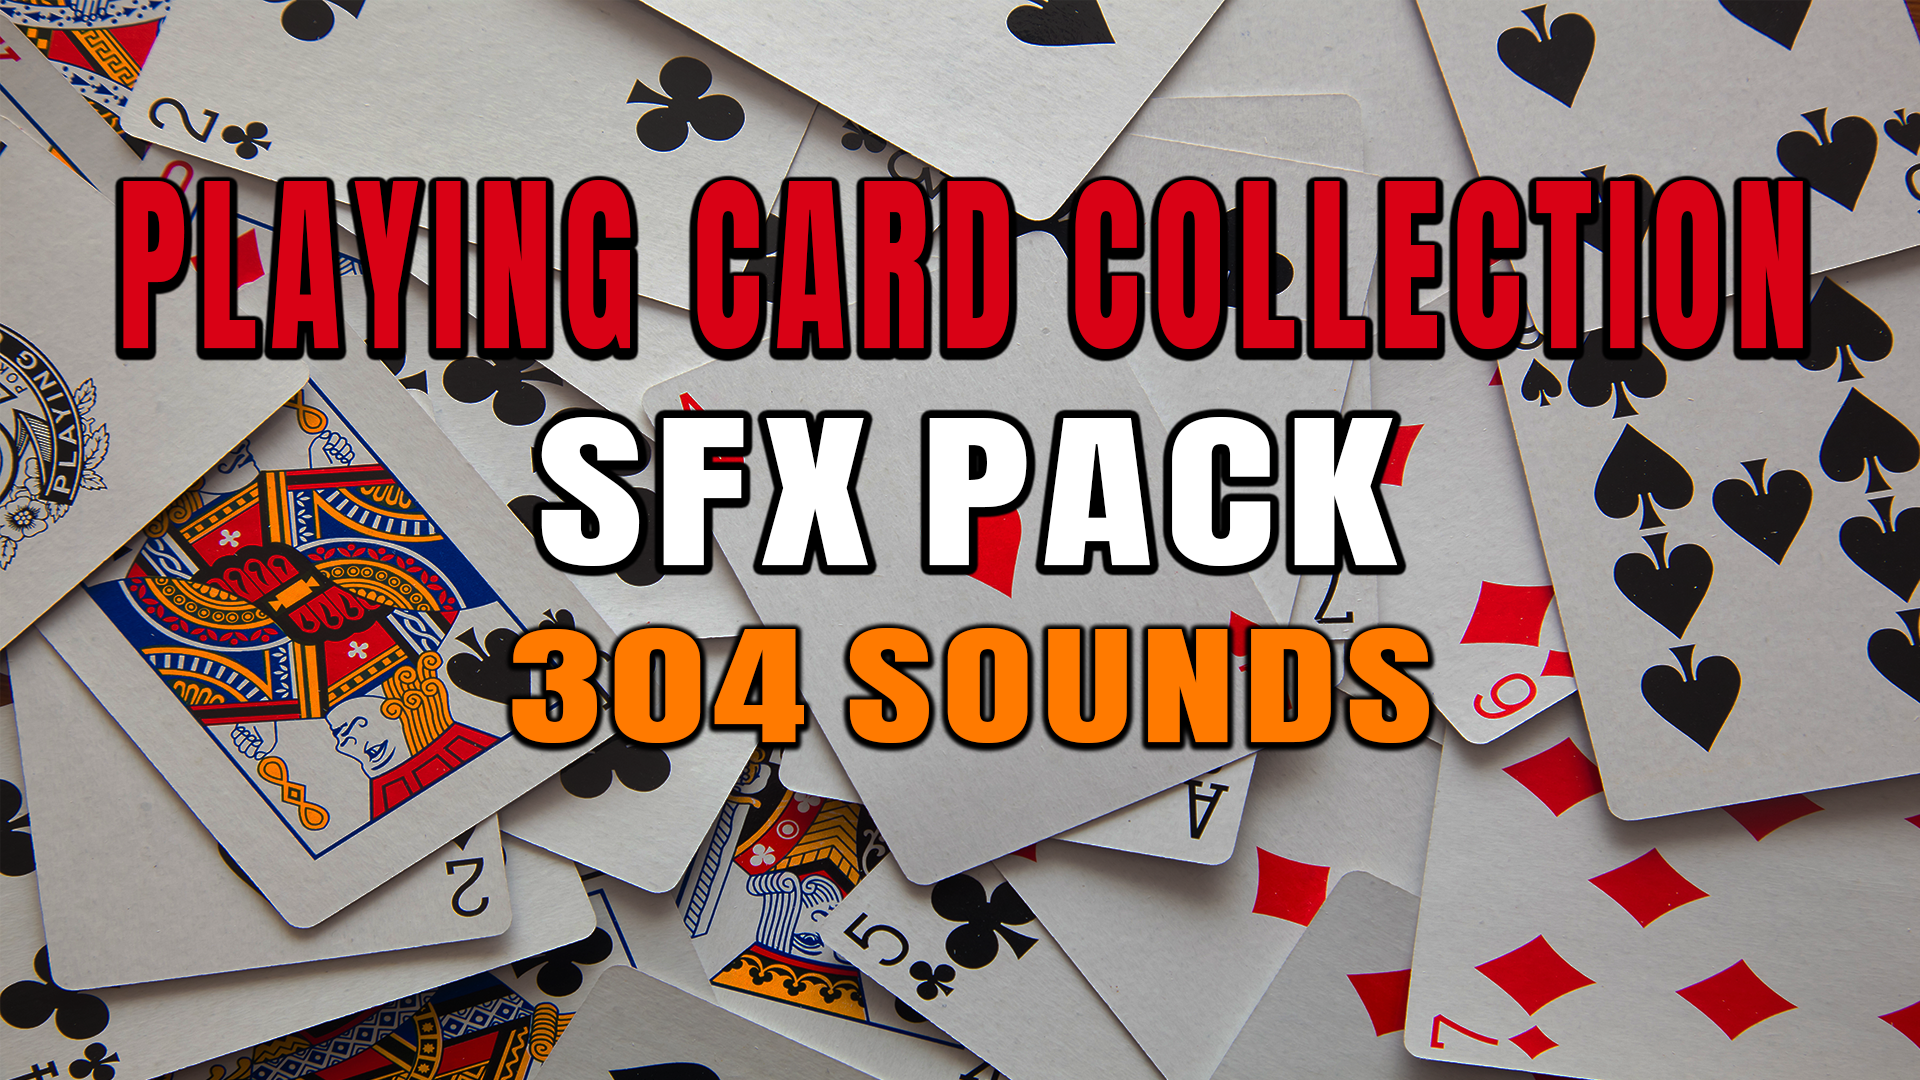 Card Sounds - Playing Card Collection Sound Pack